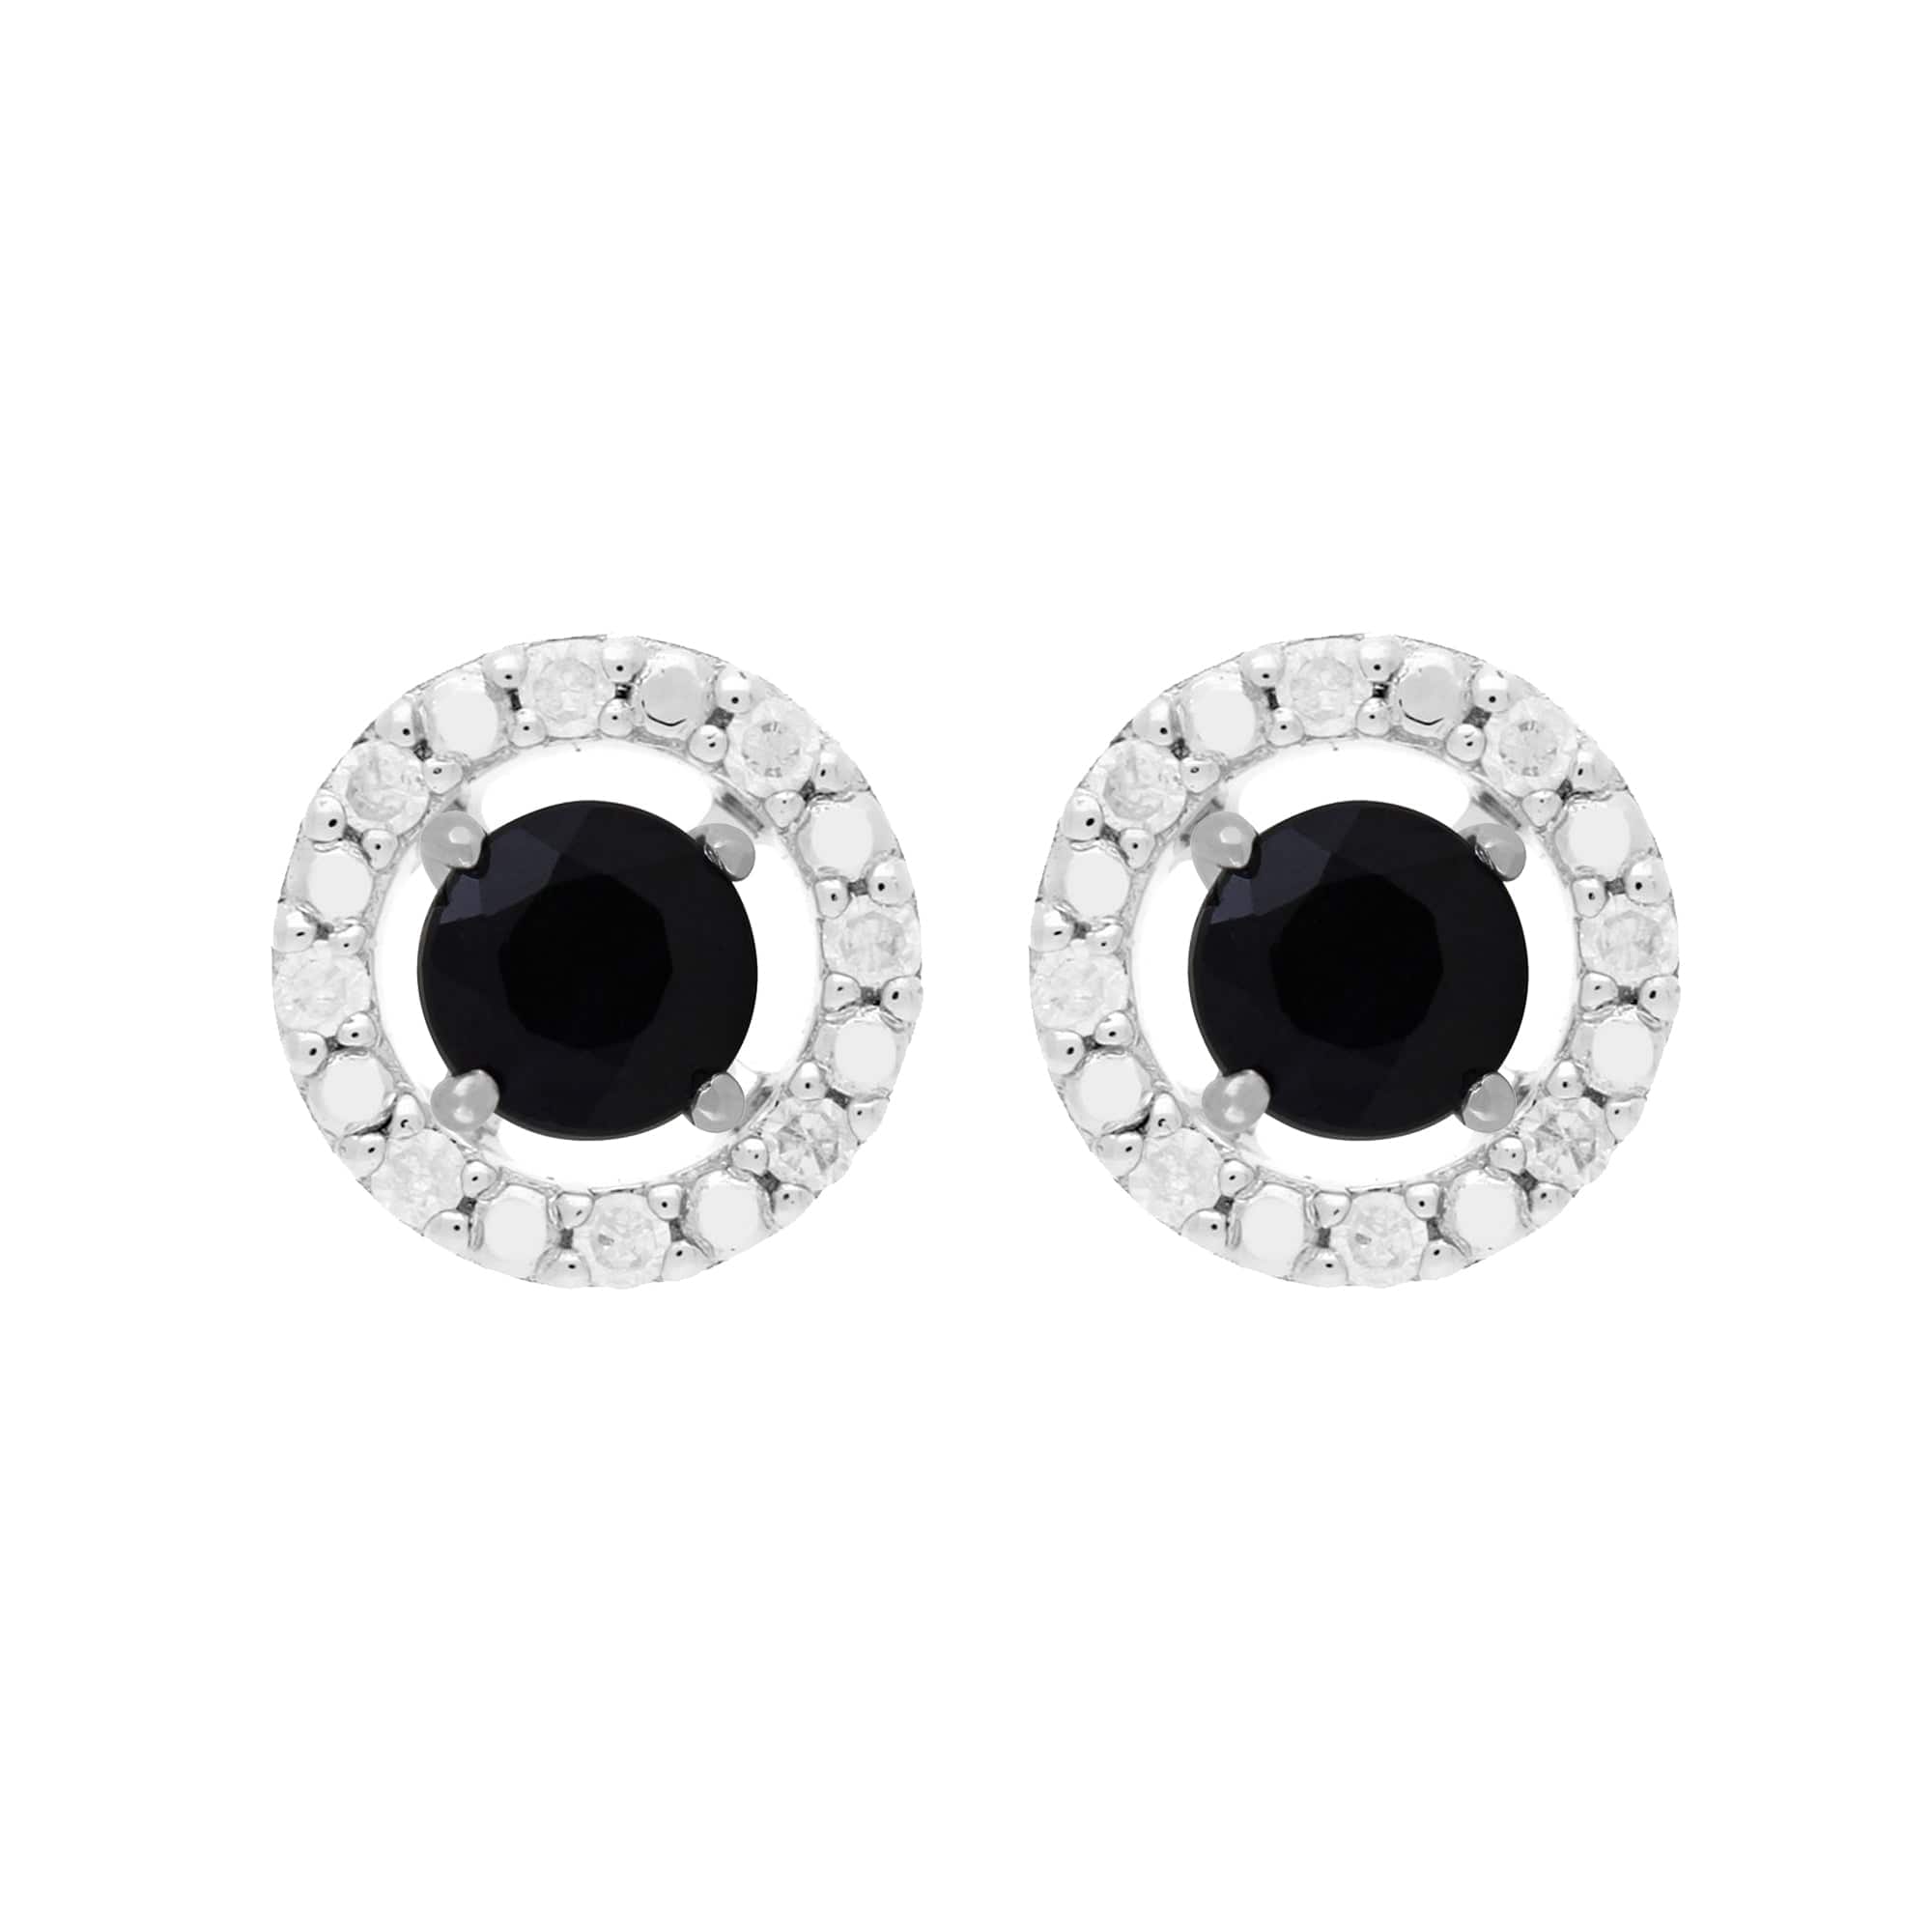 25167-162E0228019 Classic Round Dark Blue Sapphire Studs with Detachable Diamond Round Ear Jacket in 9ct White Gold 1